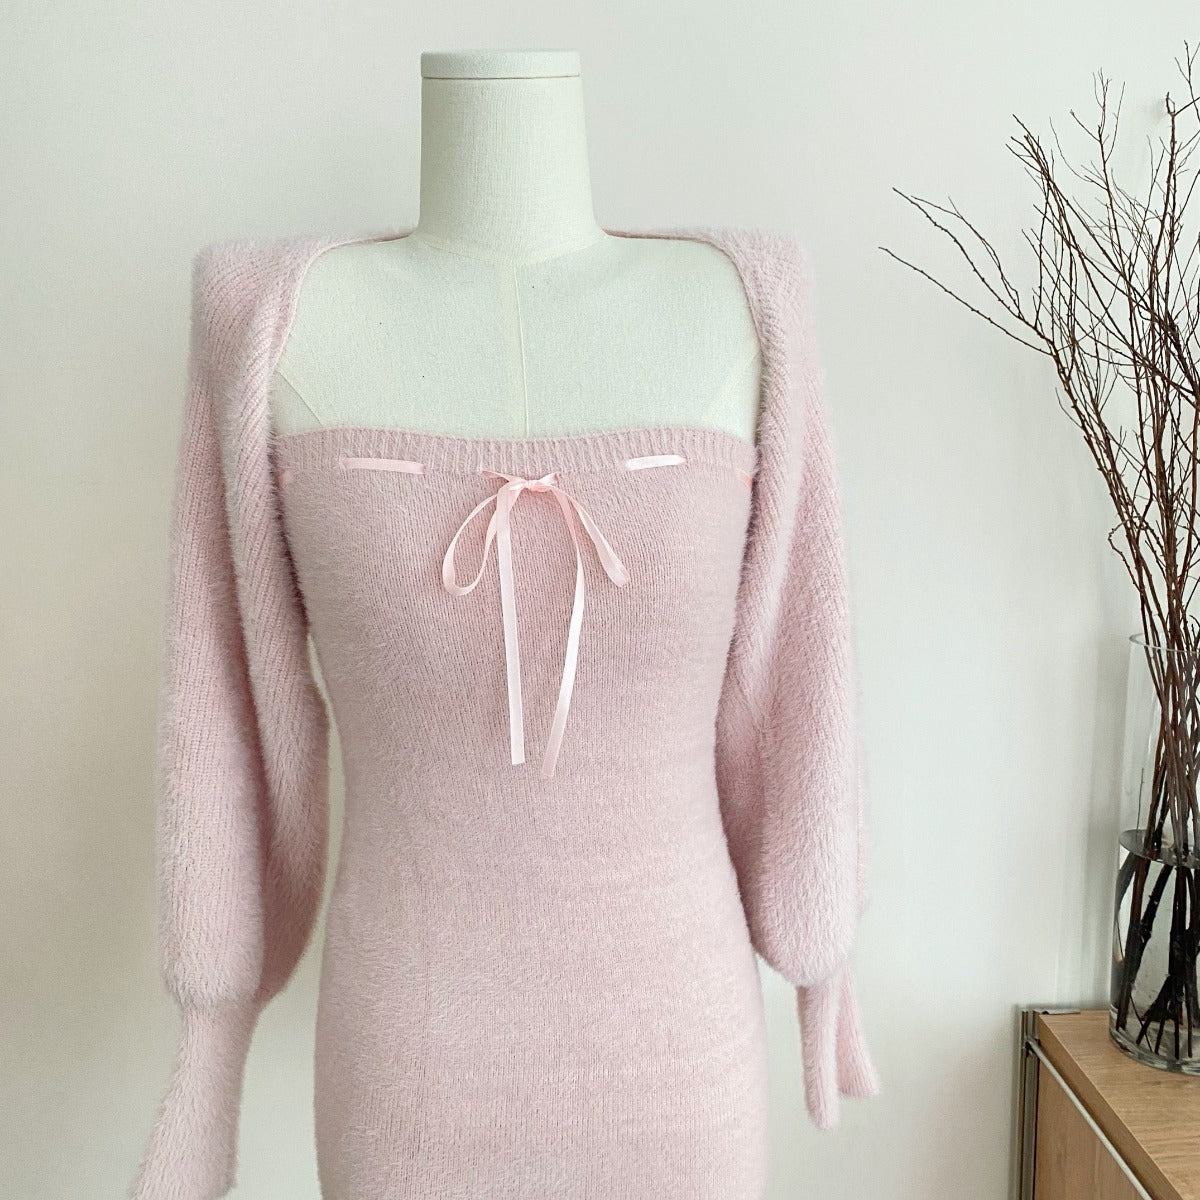 Soft And Waxy Knitted Dress With Waistband And Gentle Tube Top